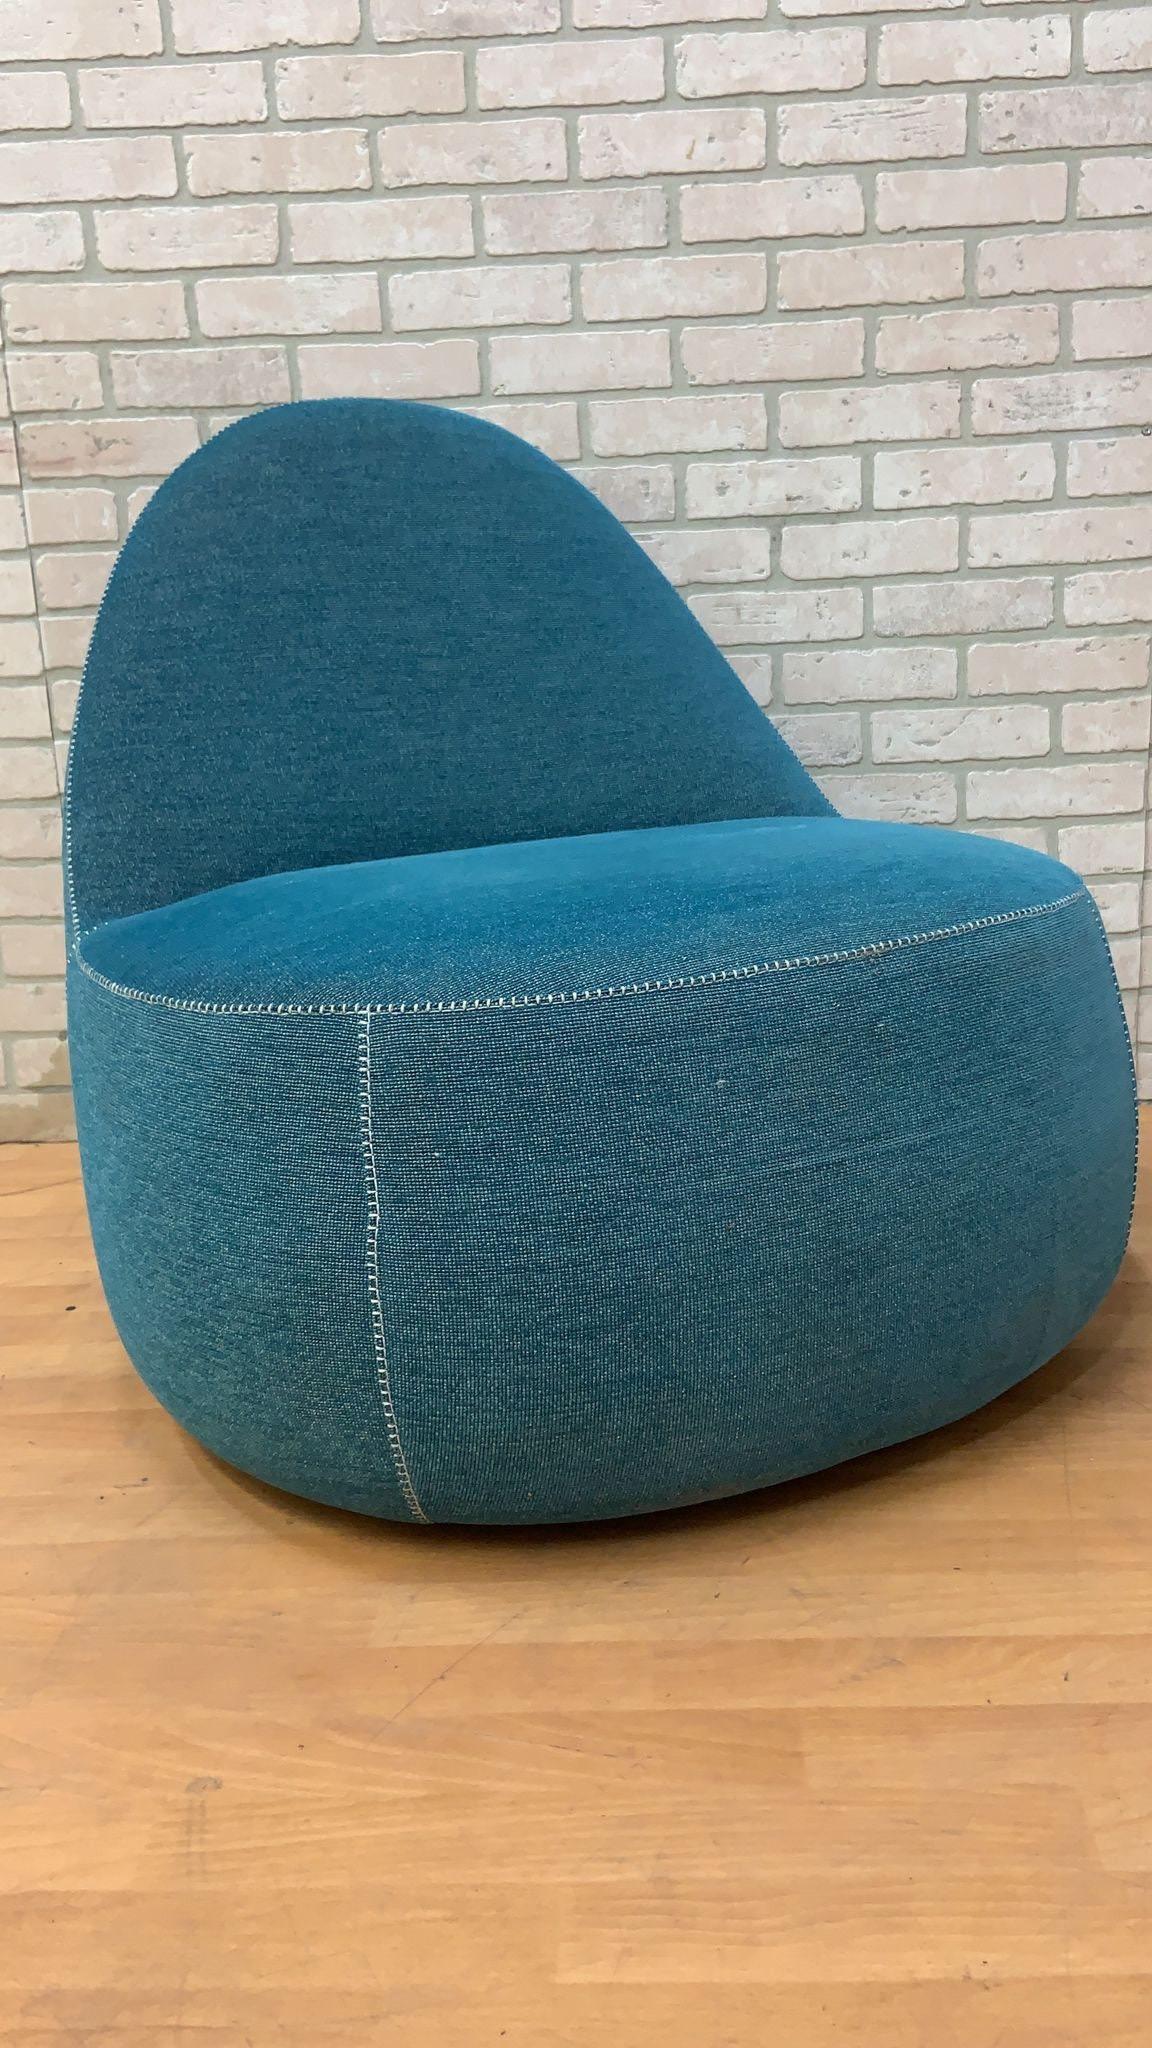 Modern Bernhardt Design Mitt lounge chair in Lagoon blue with white stitching with handle 

The Mitt Lounge designed by El Salvadoran Designers Harry and Claudia Washington for Bernhardt Design. The Chair’s Comfortable and Relaxed form,